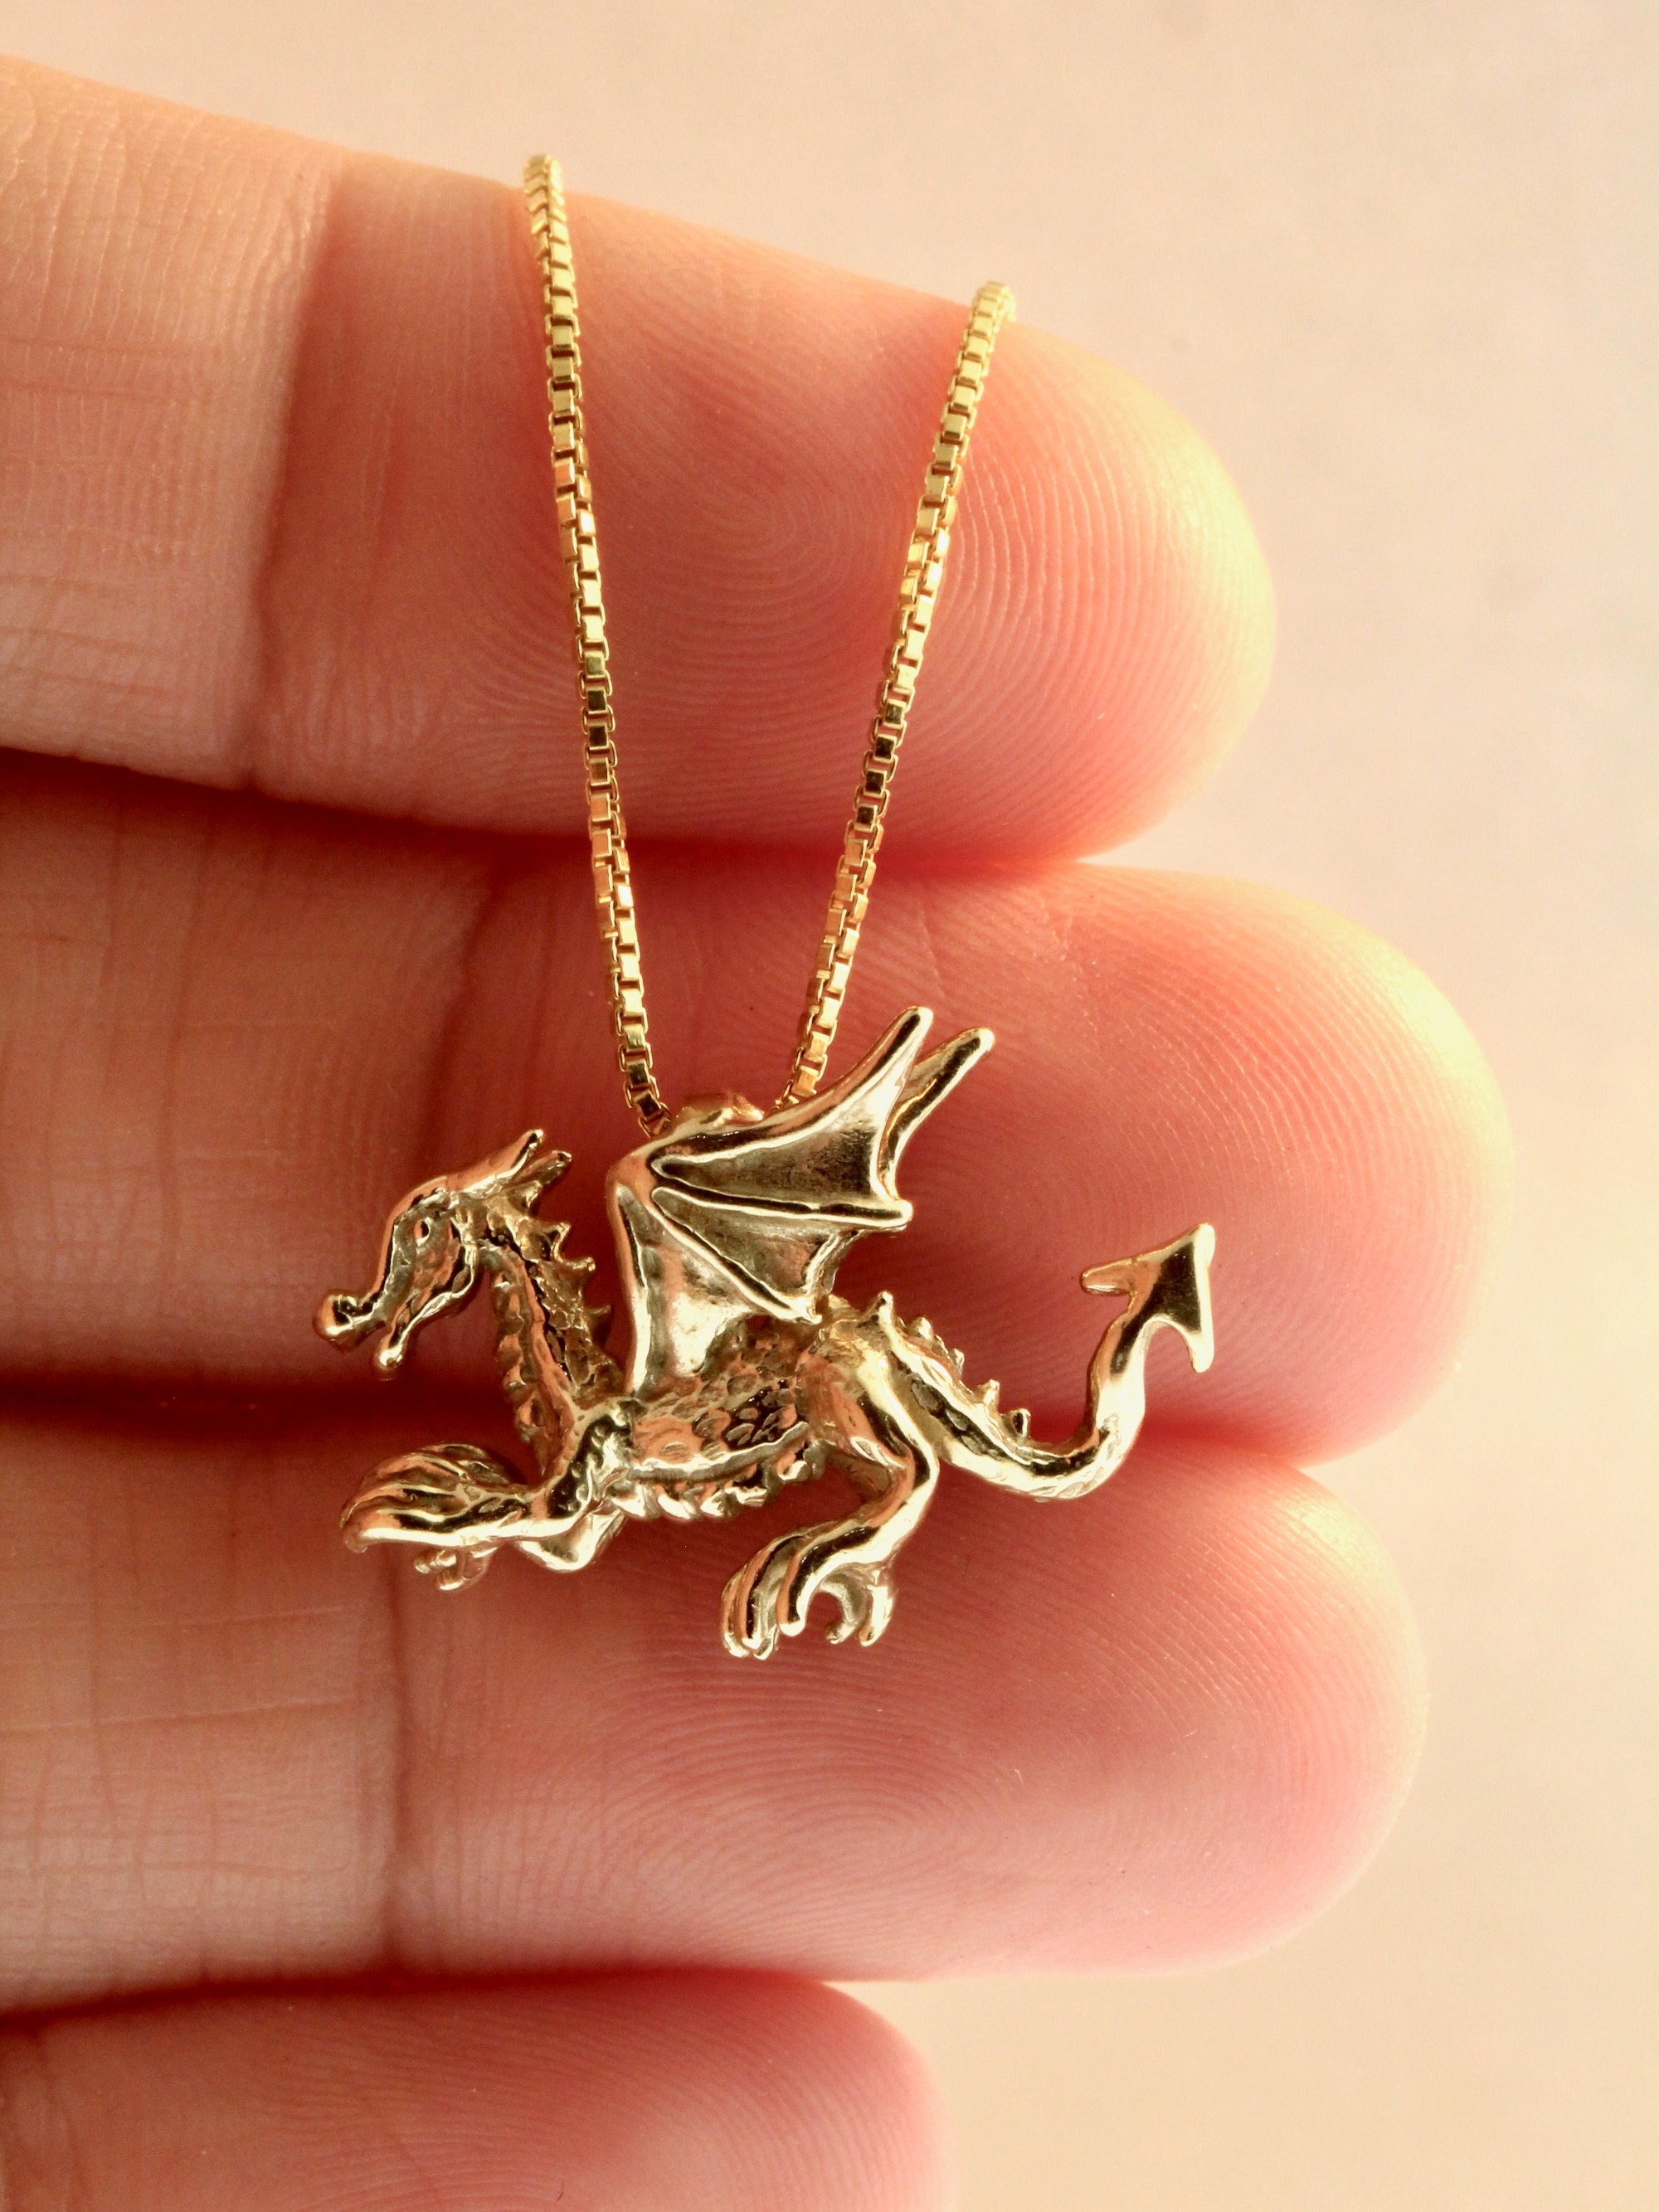 Enamel Alloy 3D Cartoon Dragon Necklace Pendant Gifts Animals Charms  Jewelry